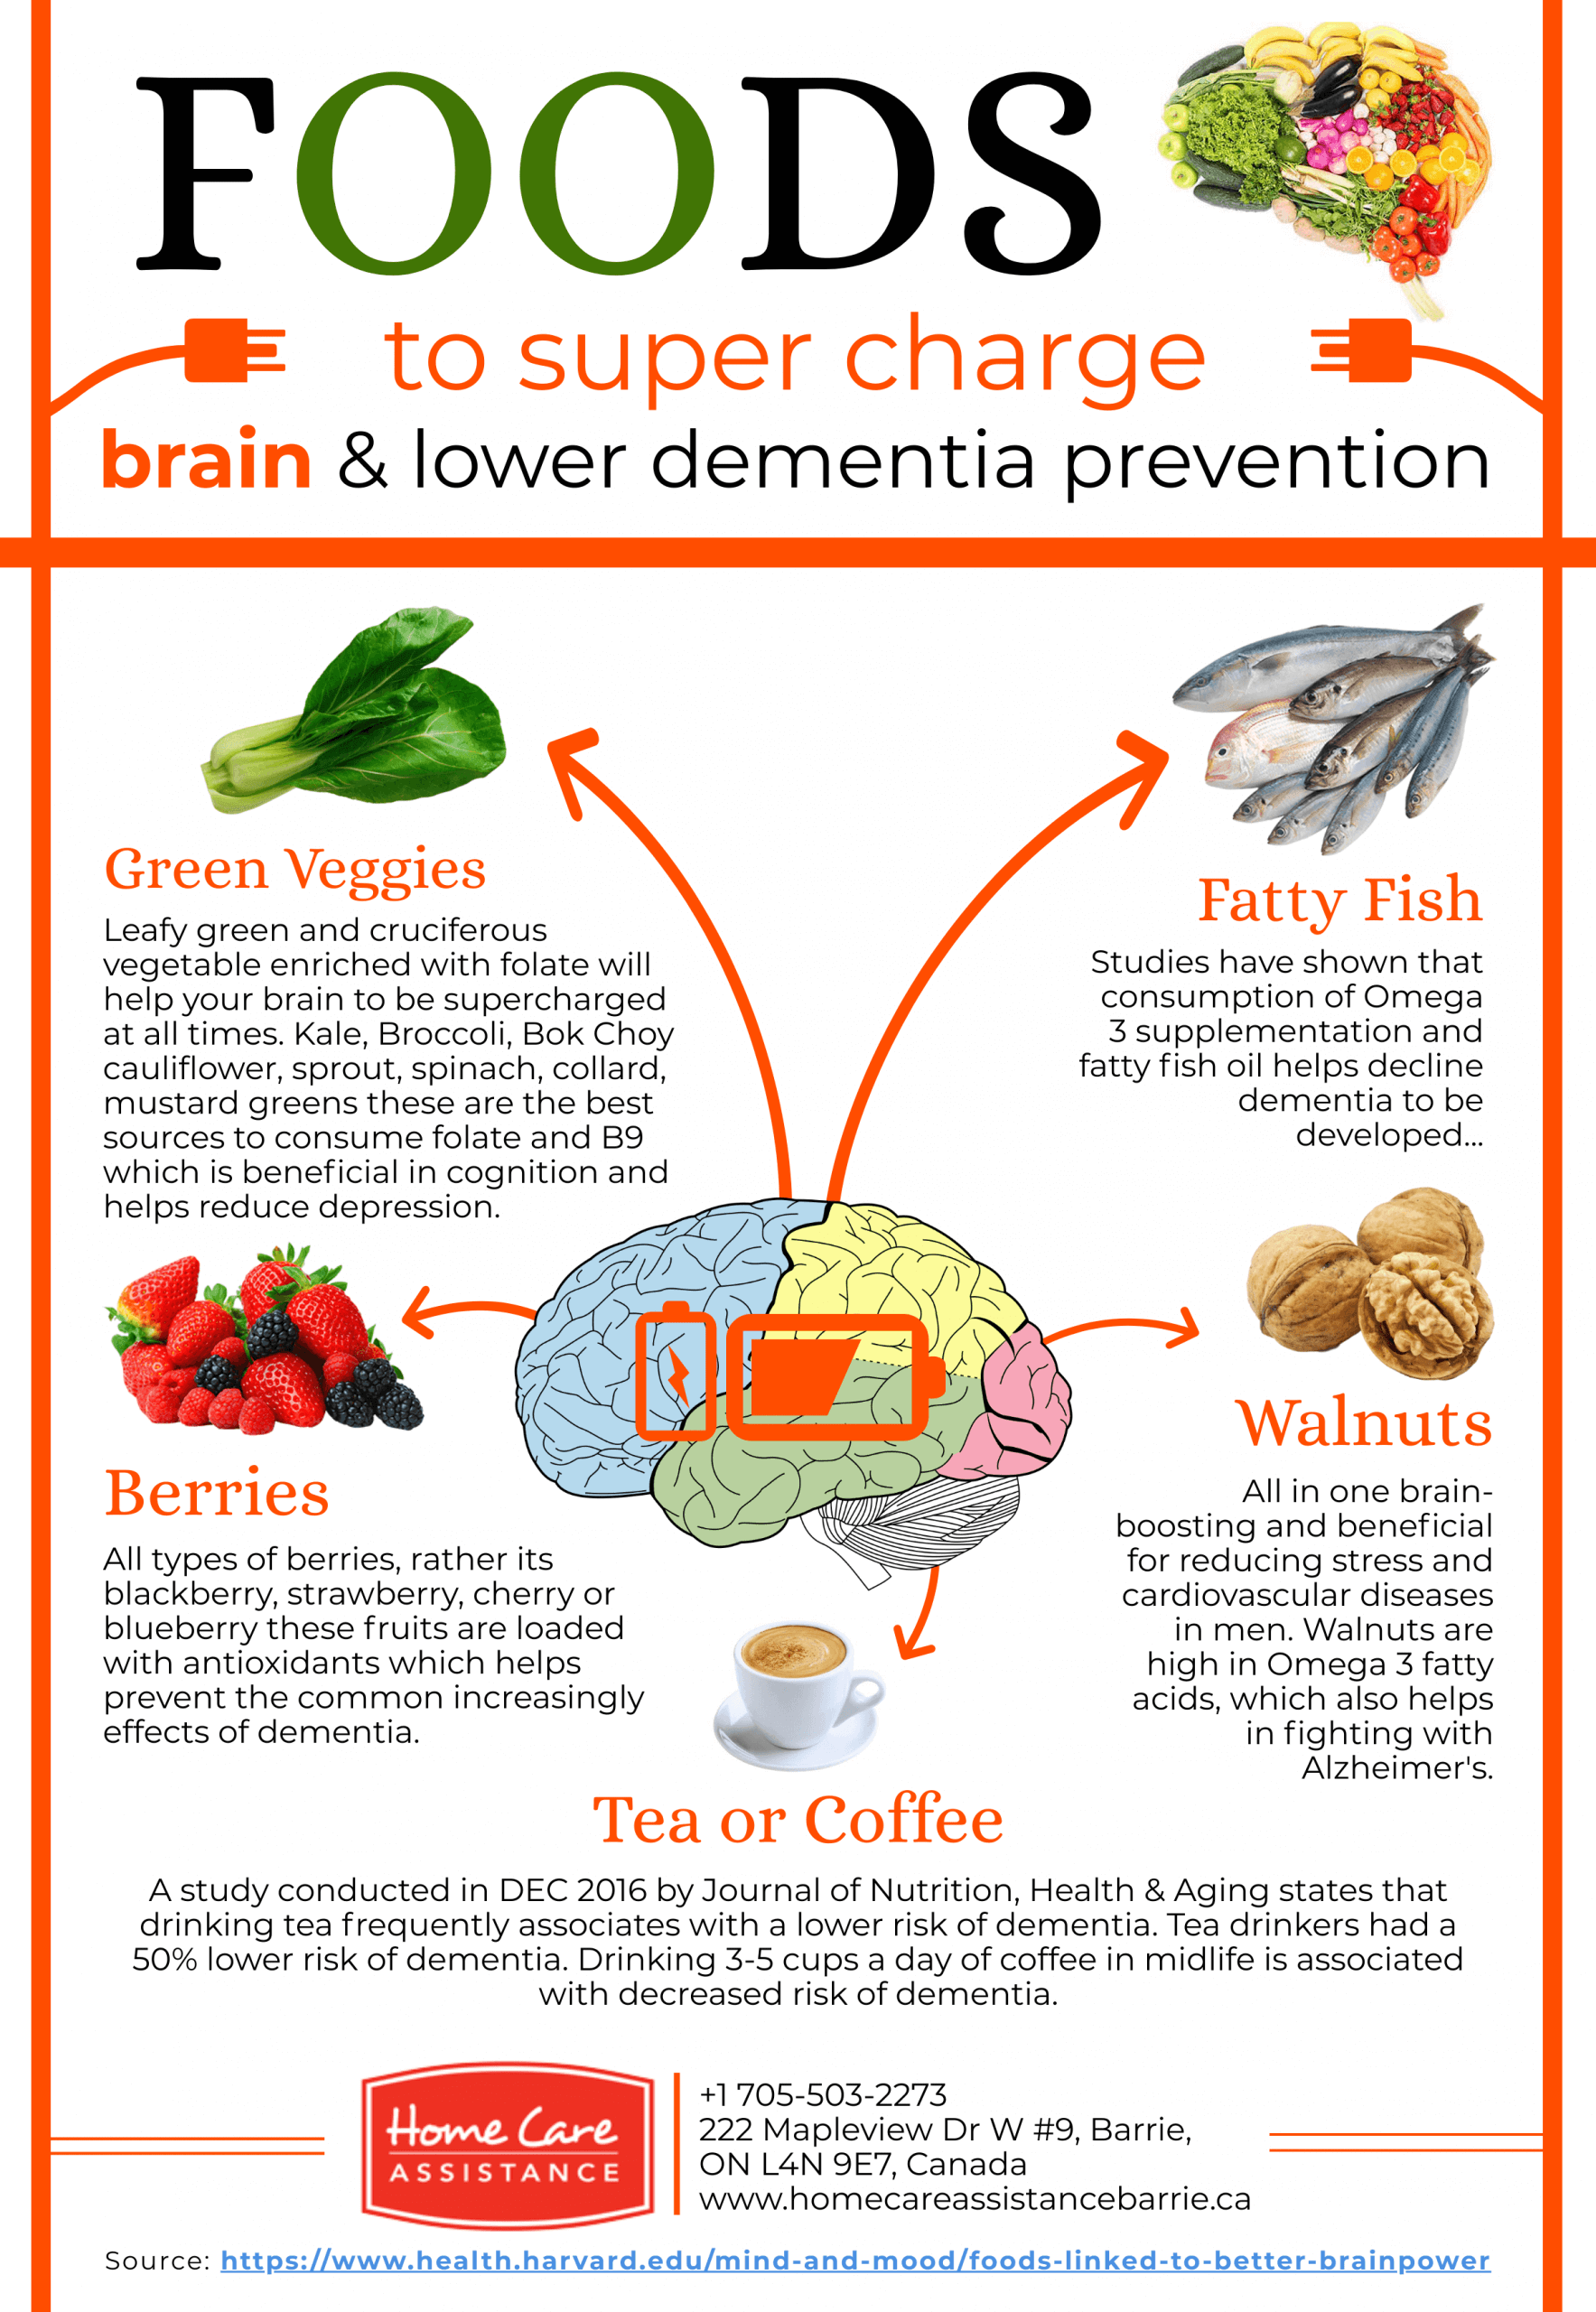 Foods for Brain Health & Lowering Dementia Risk [Infographic]